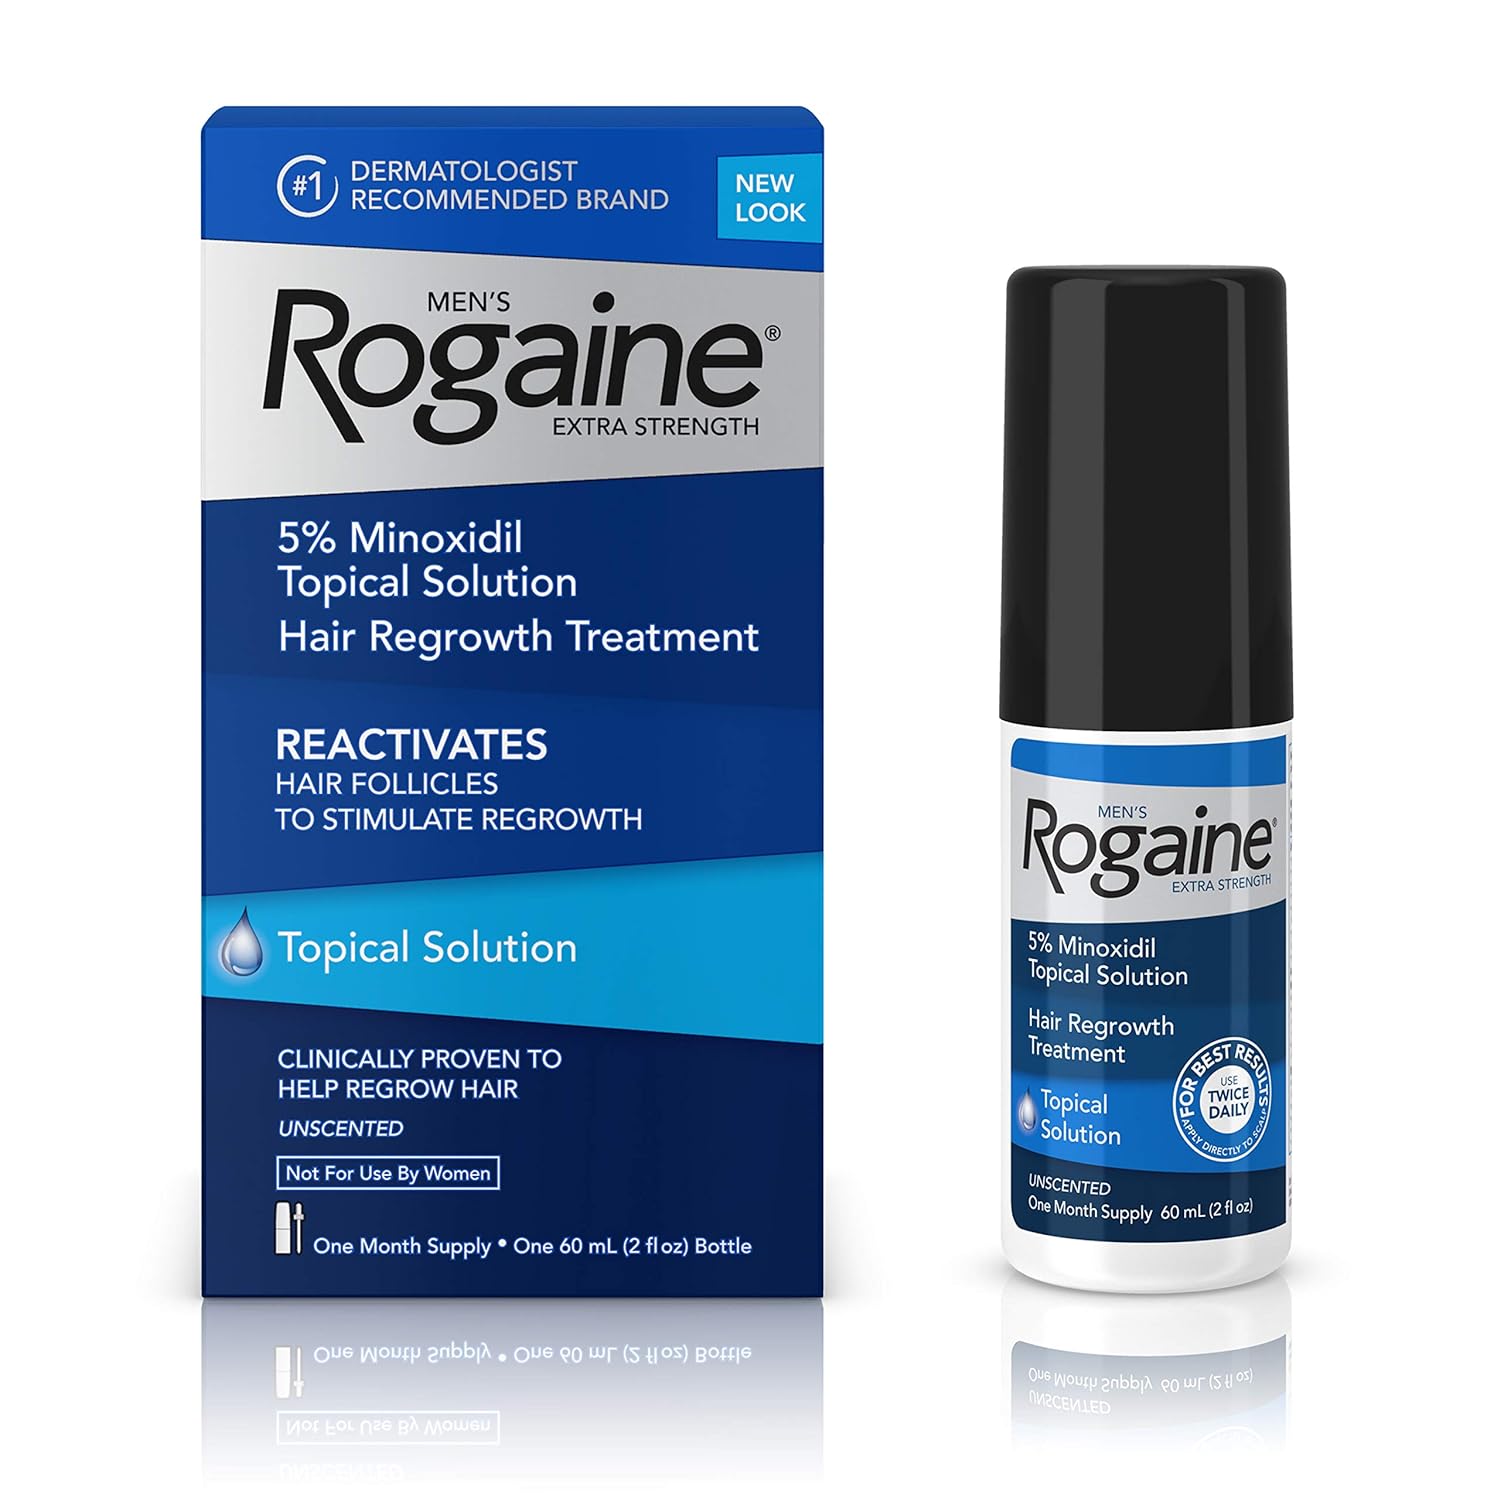 Men's Rogaine Extra Strength 5% Minoxidil Topical Solution for Hair Loss and Hair Regrowth, Topical 